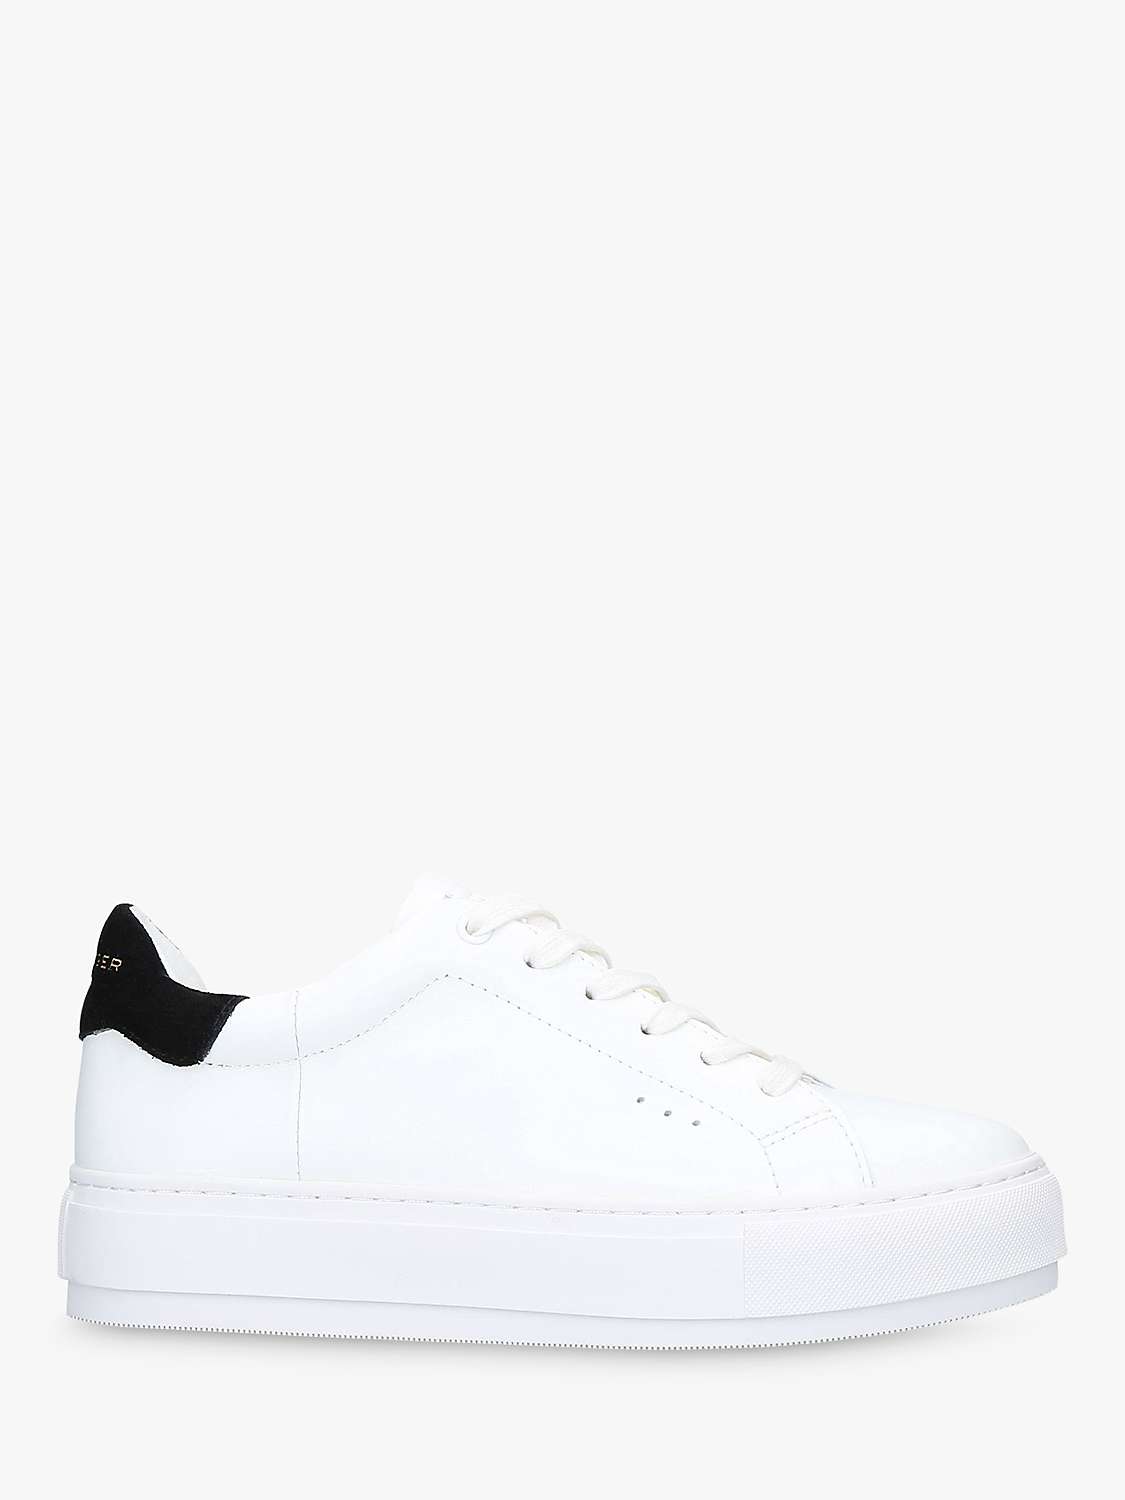 Kurt Geiger London Laney Leather Trainers, White at John Lewis & Partners